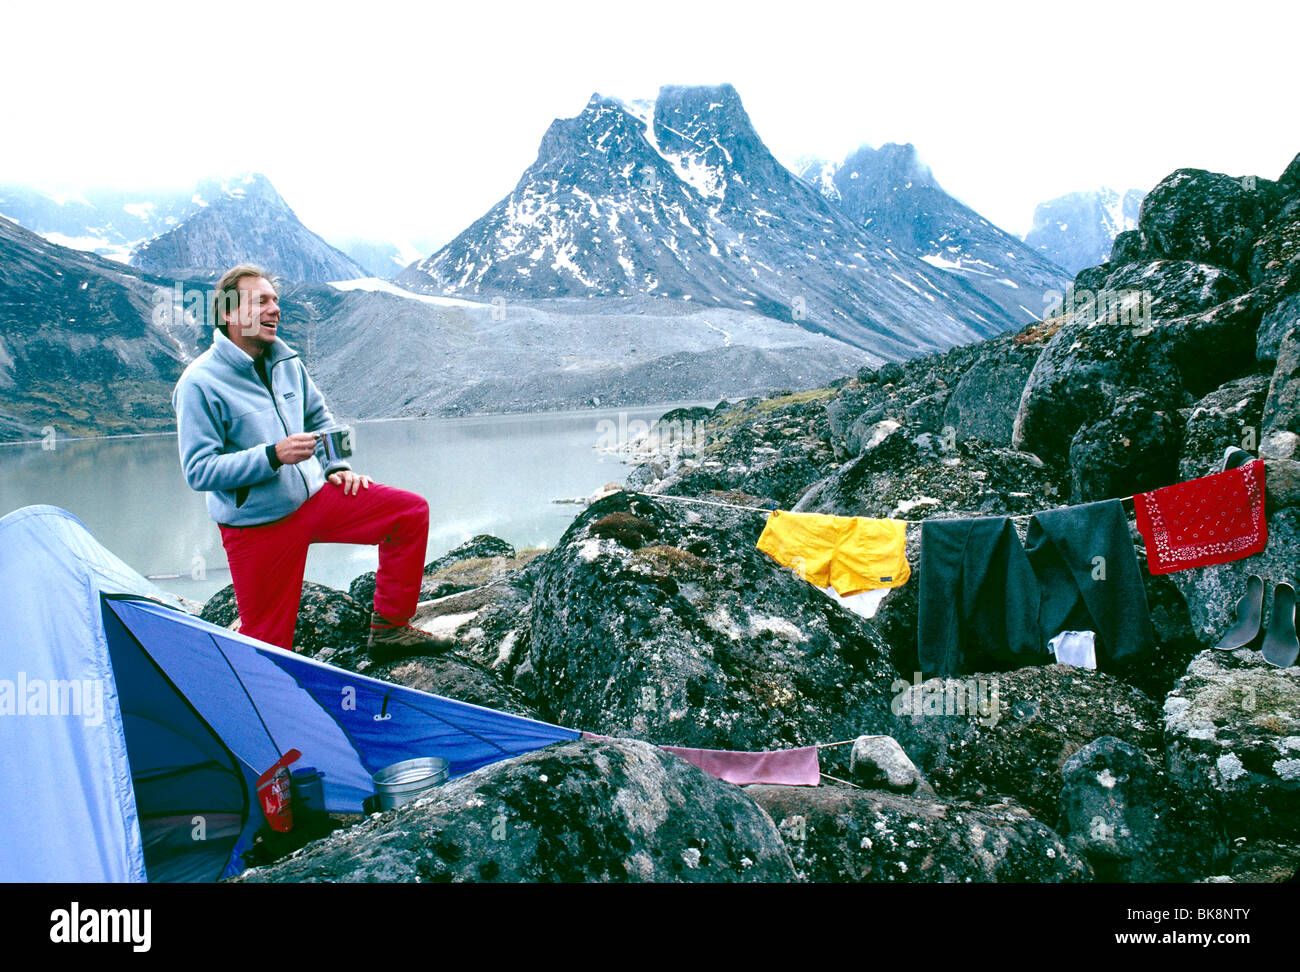 Photographer H. Mark Weidman drying out wet clothing on a backpacking trip in Auyuittuq National Park, Nunavut, Canada Stock Photo